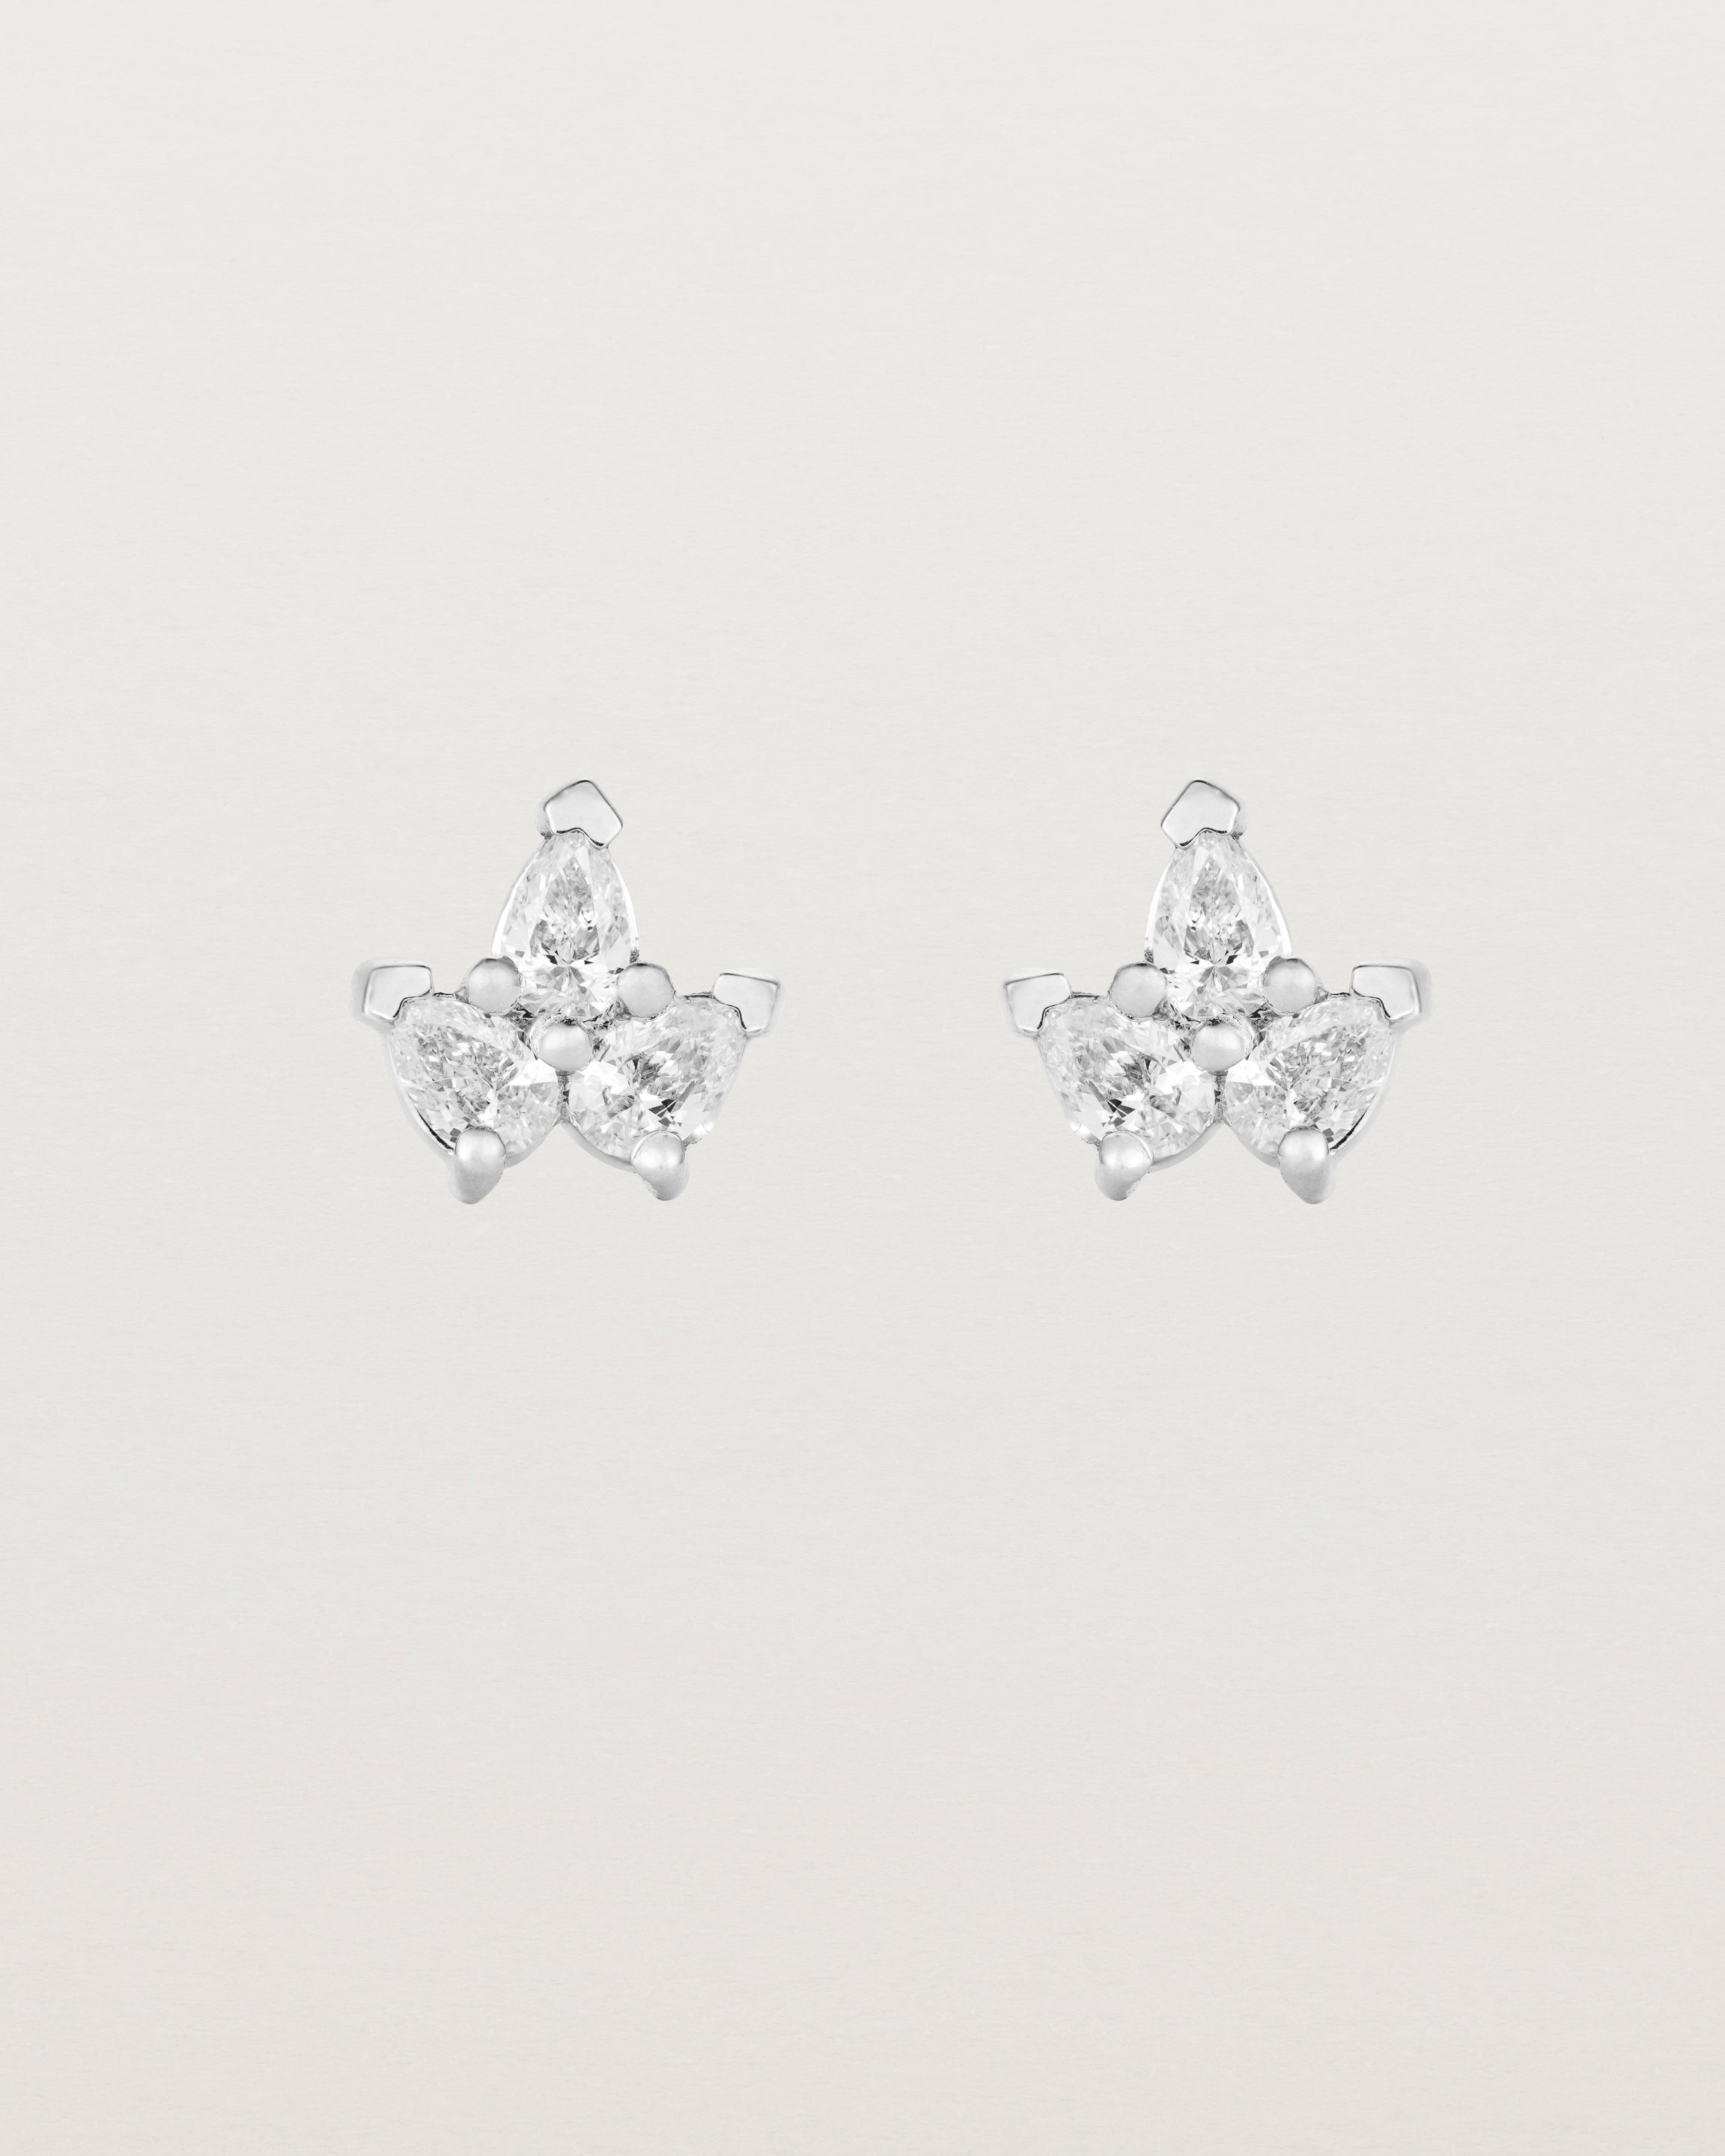 A pair of white gold studs featuring three pear shaped diamonds